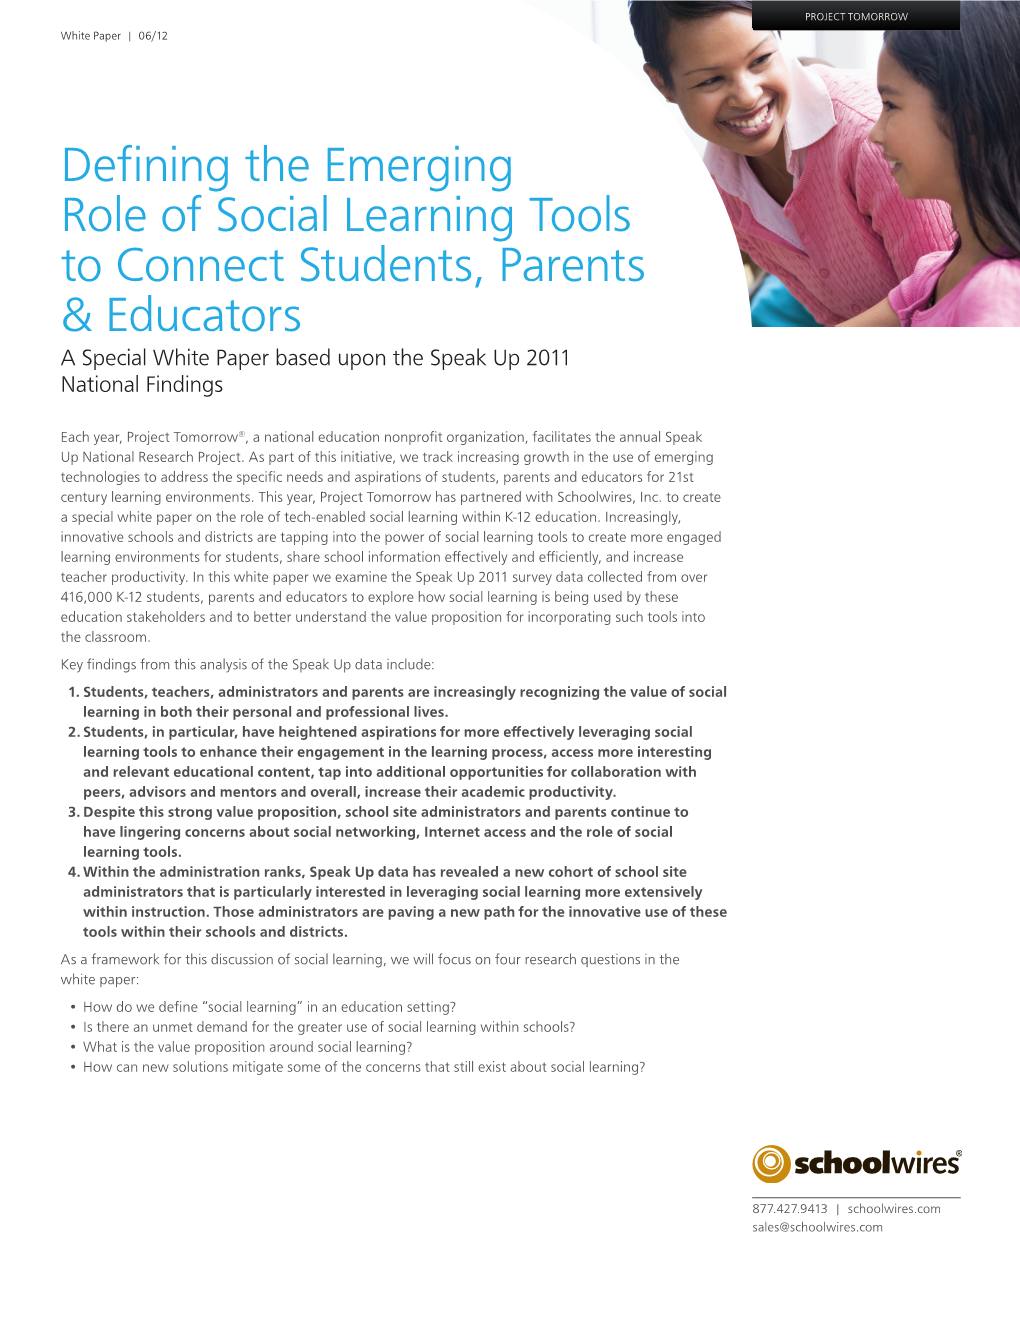 De Ning the Emerging Role of Social Learning Tools to Connect Students, Parents & Educators a Special White Paper Based Upon the Speak up 2011 National Findings